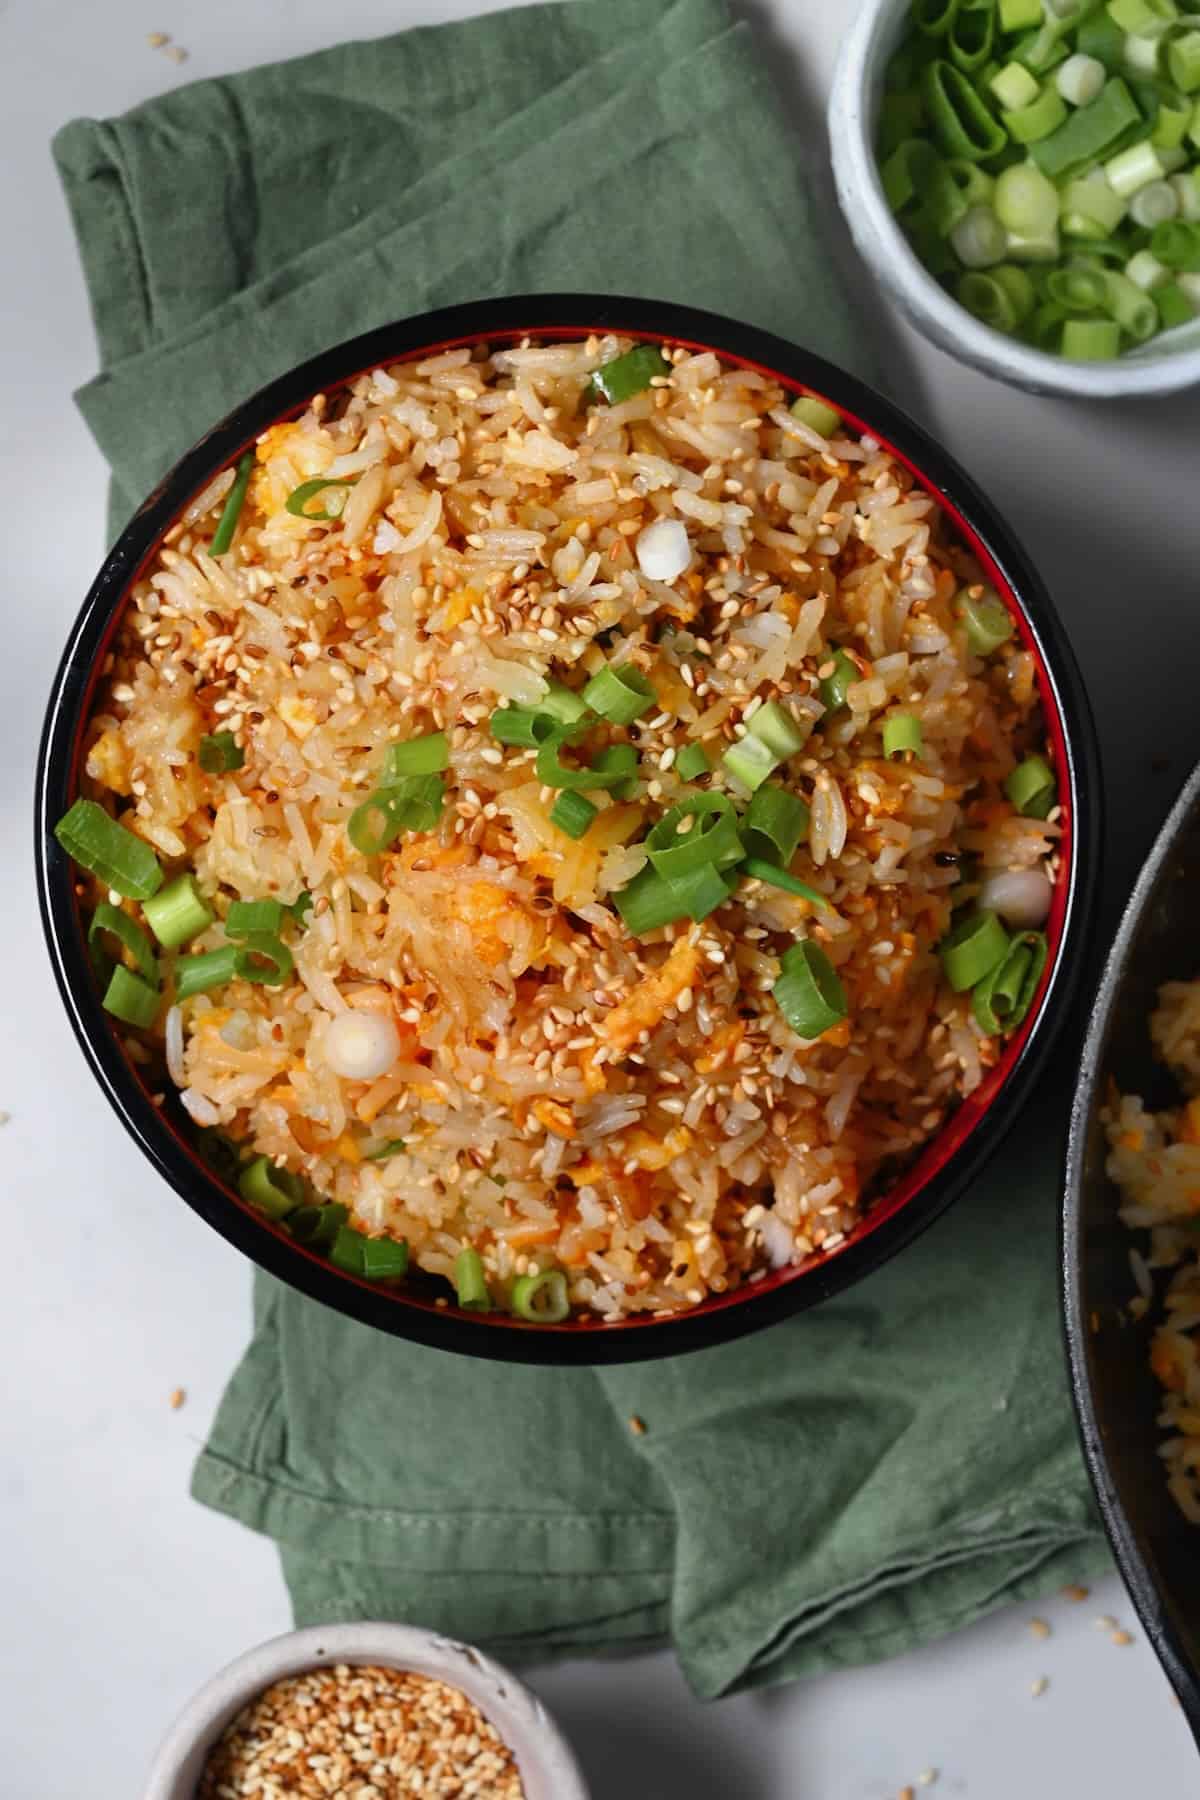 A serving of egg fried rice topped with scallions and sesame sees